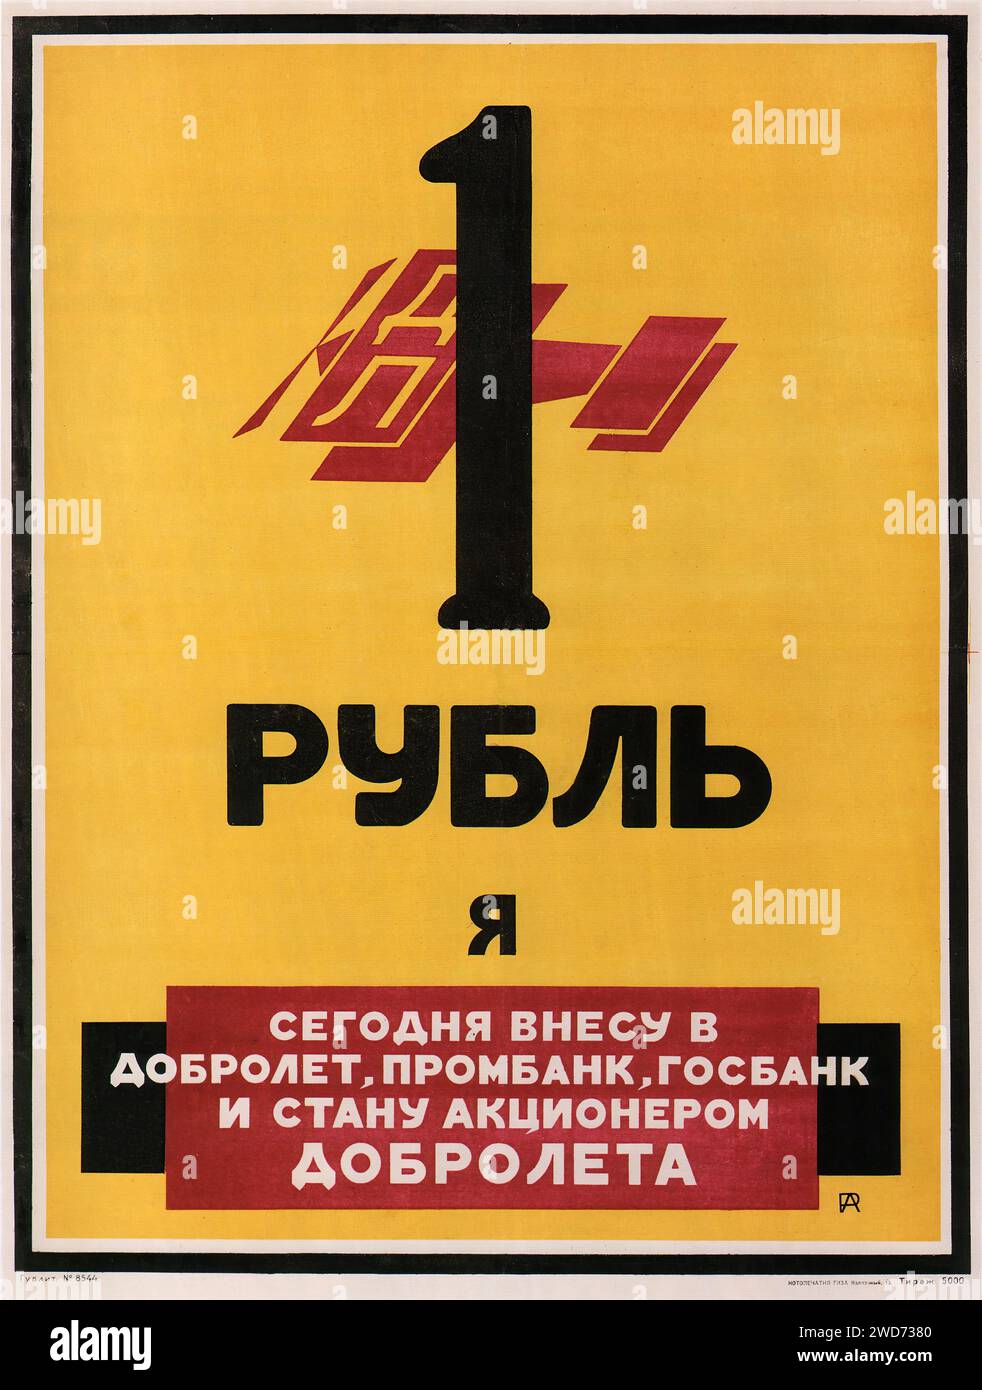 One Rouble for Dobrolet. Alexander Rodchenko, 1923 - Vintage Soviet Advertising and propaganda - '1 RUBLE I' '                        ,         ,                                     ' | 'TODAY I WILL CONTRIBUTE TO DOBROLET, PROMBANK, GOSBANK AND BECOME A SHAREHOLDER OF DOBROLET'  Description: This graphic poster features a bold number '1' and the message about contributing one ruble to Dobrolet, Prombank, and Gosbank, and becoming a shareholder in Dobrolet. The design is simple yet effective, using minimalistic elements and large typography to convey its message, typical of Soviet graphic desi Stock Photo